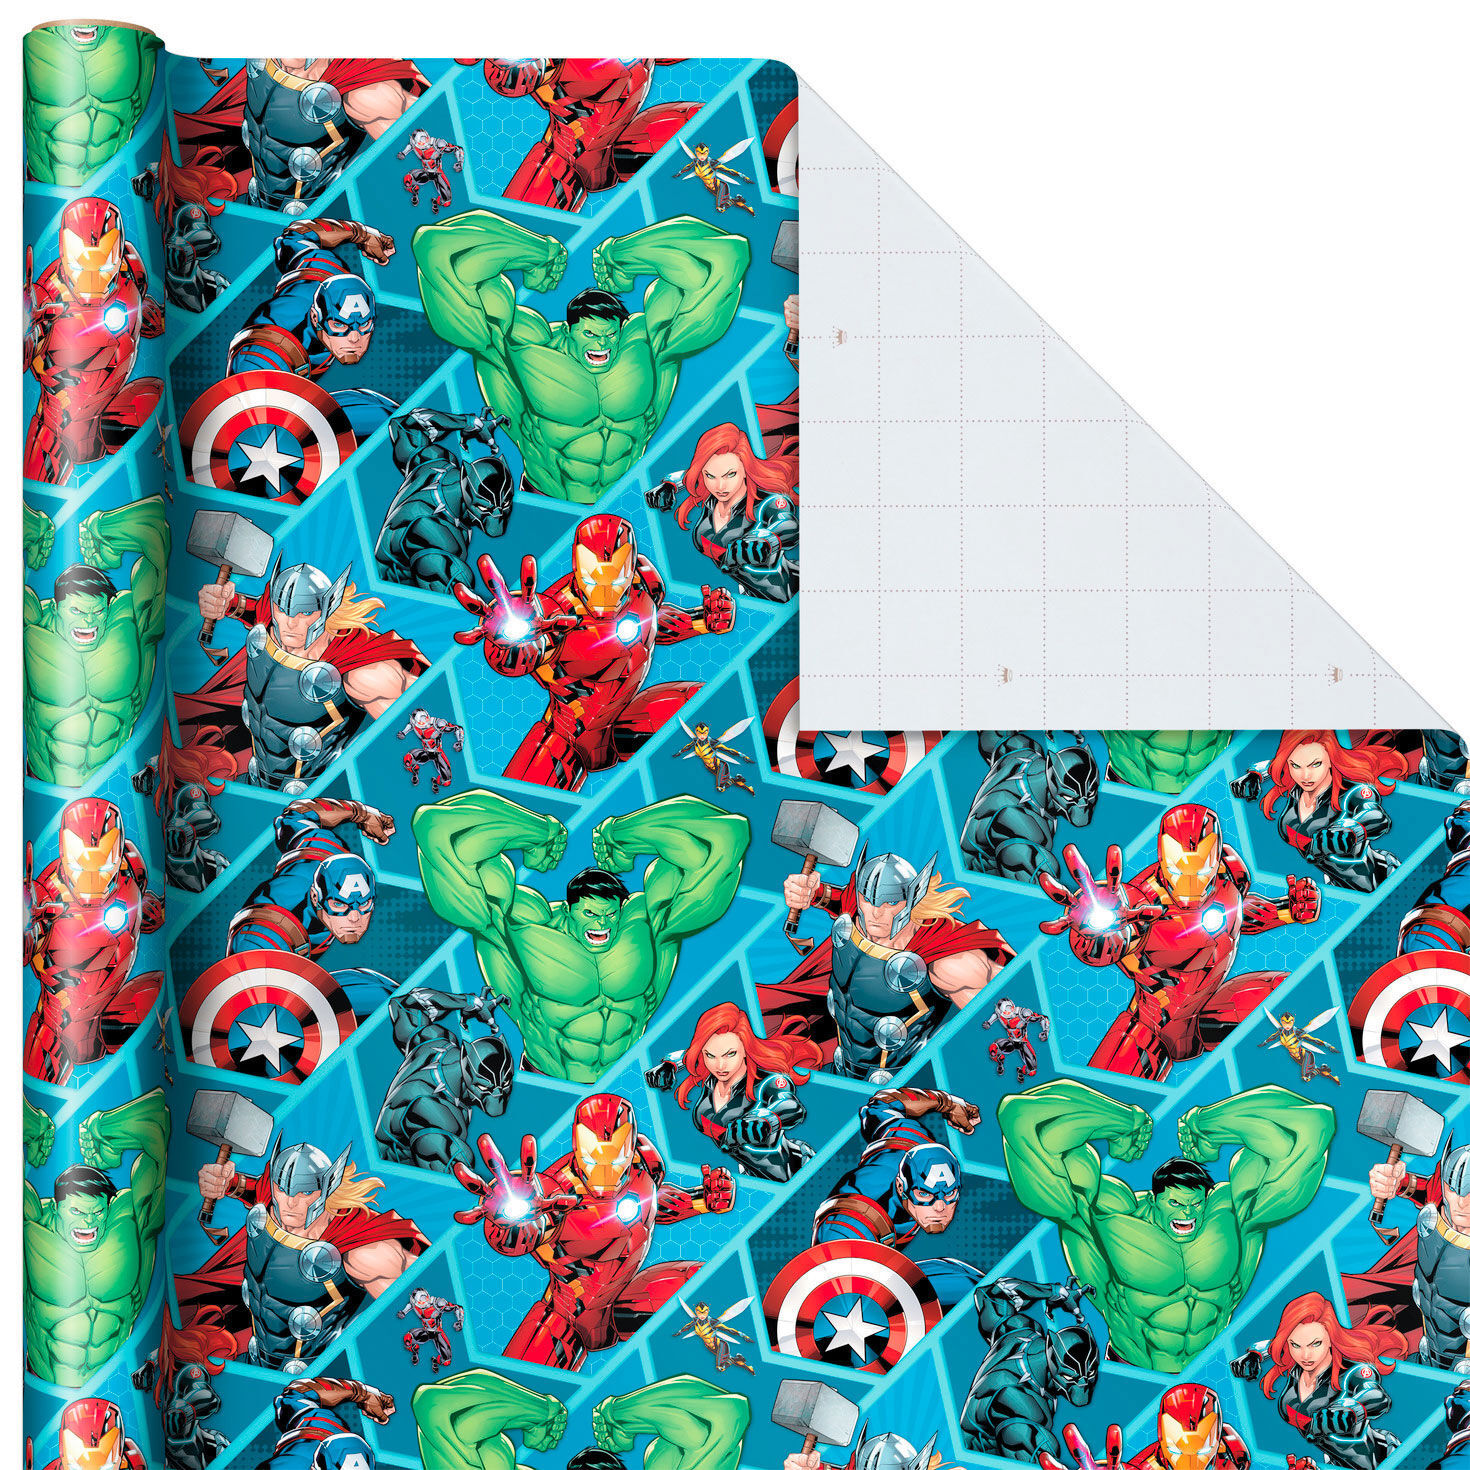 LARGE ROLL 70 SQ / NEW MARVEL AVENGERS CHRISTMAS WRAPPING PAPER FT 